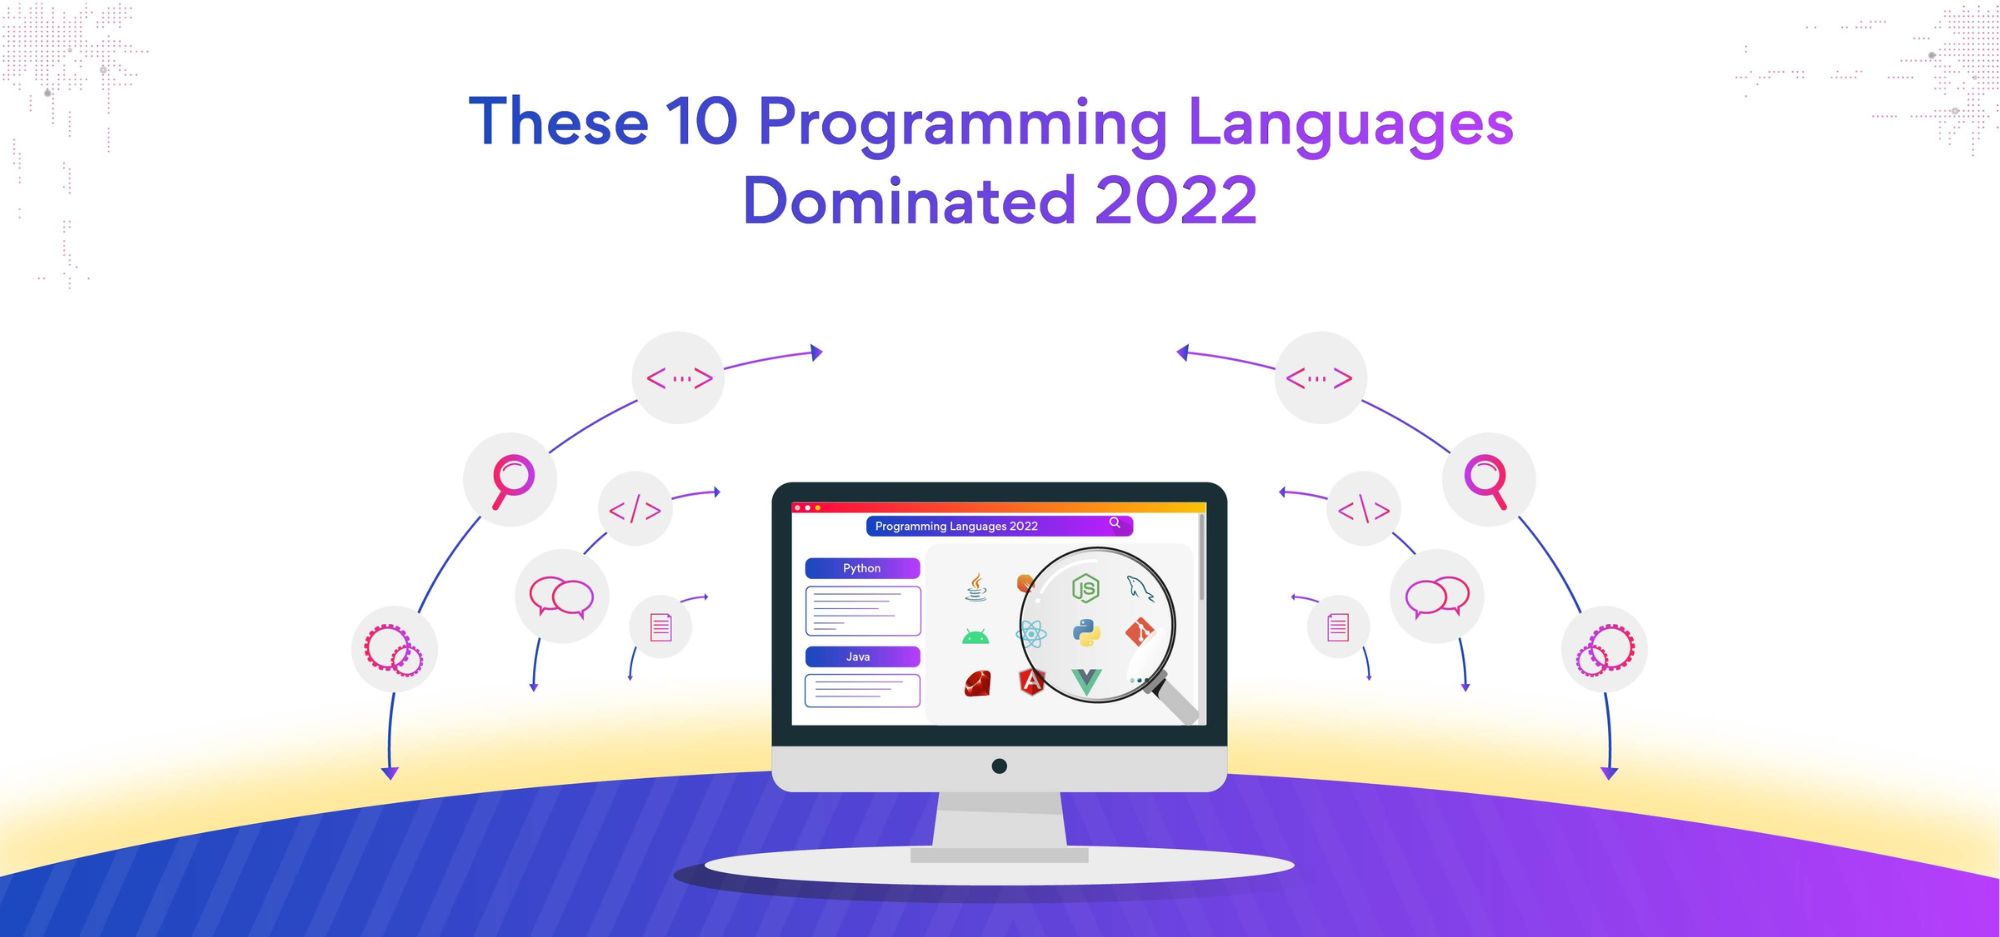 These Programming Languages Dominated 2022